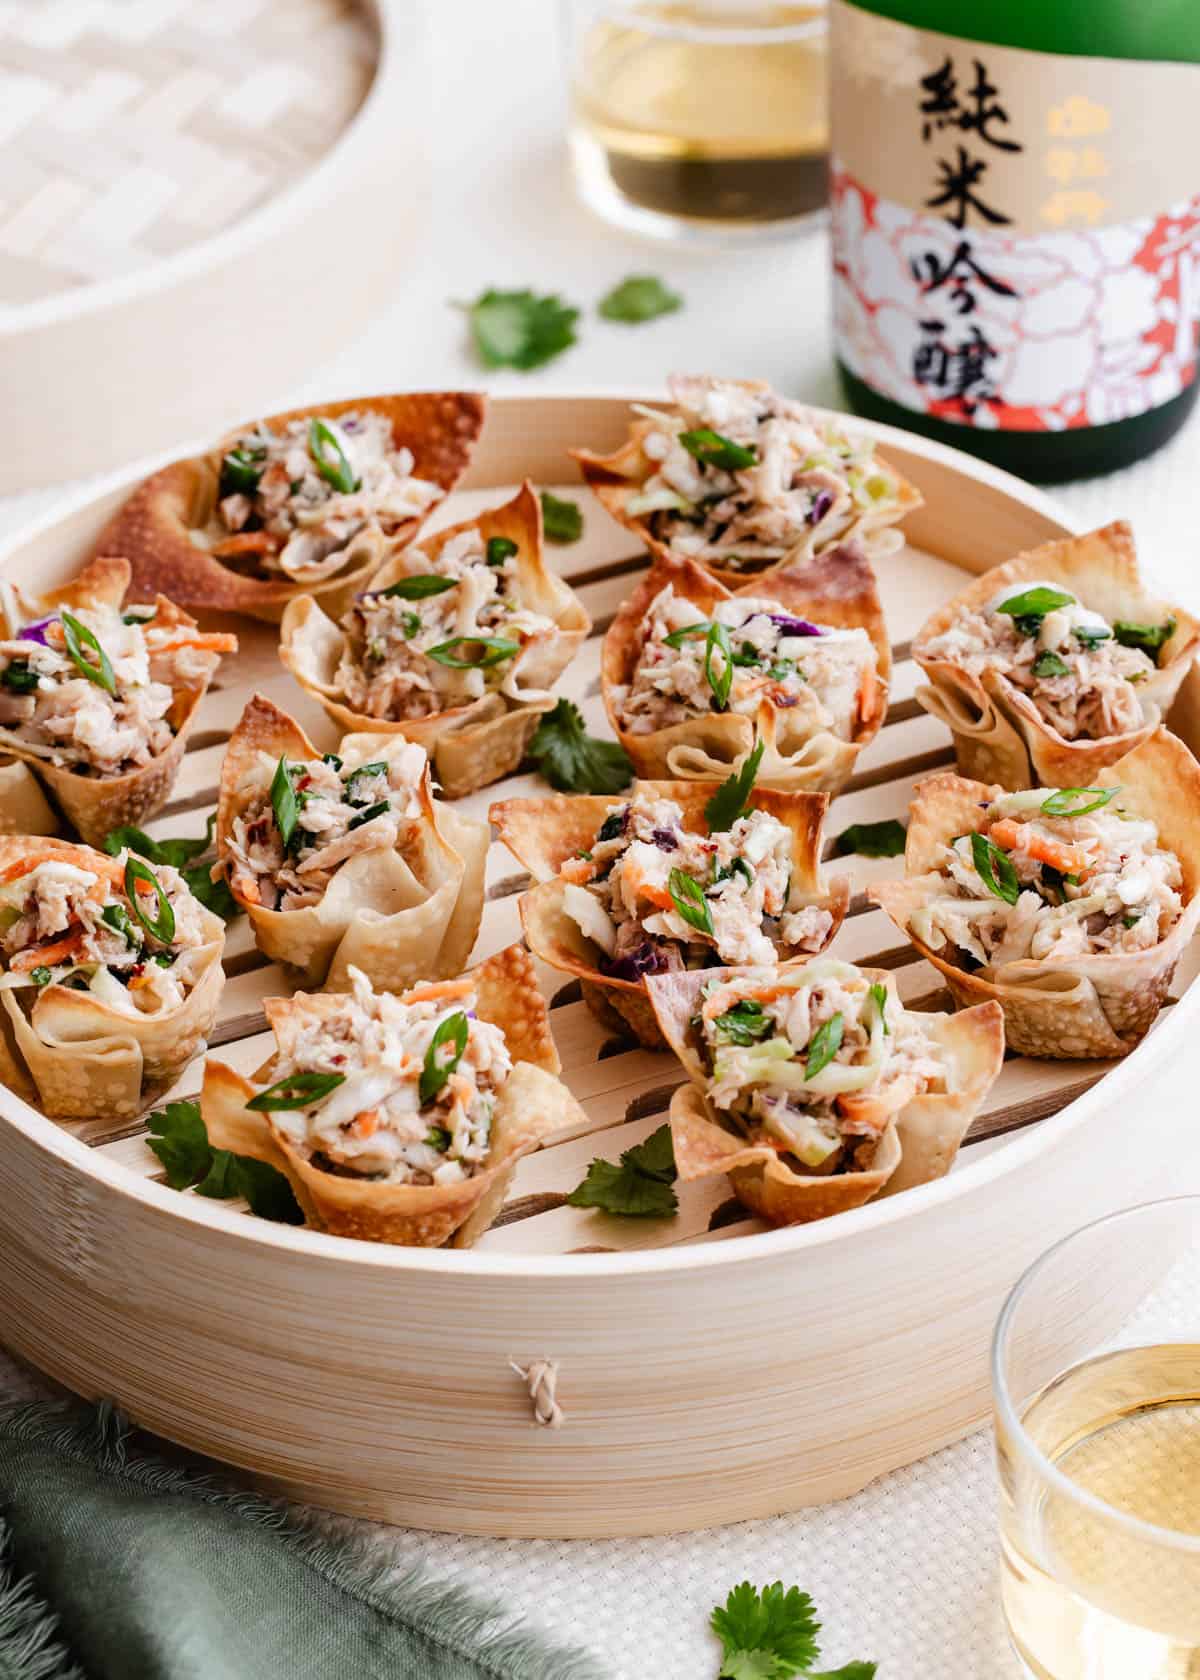 tuna salad in wonton cups in party table setting.